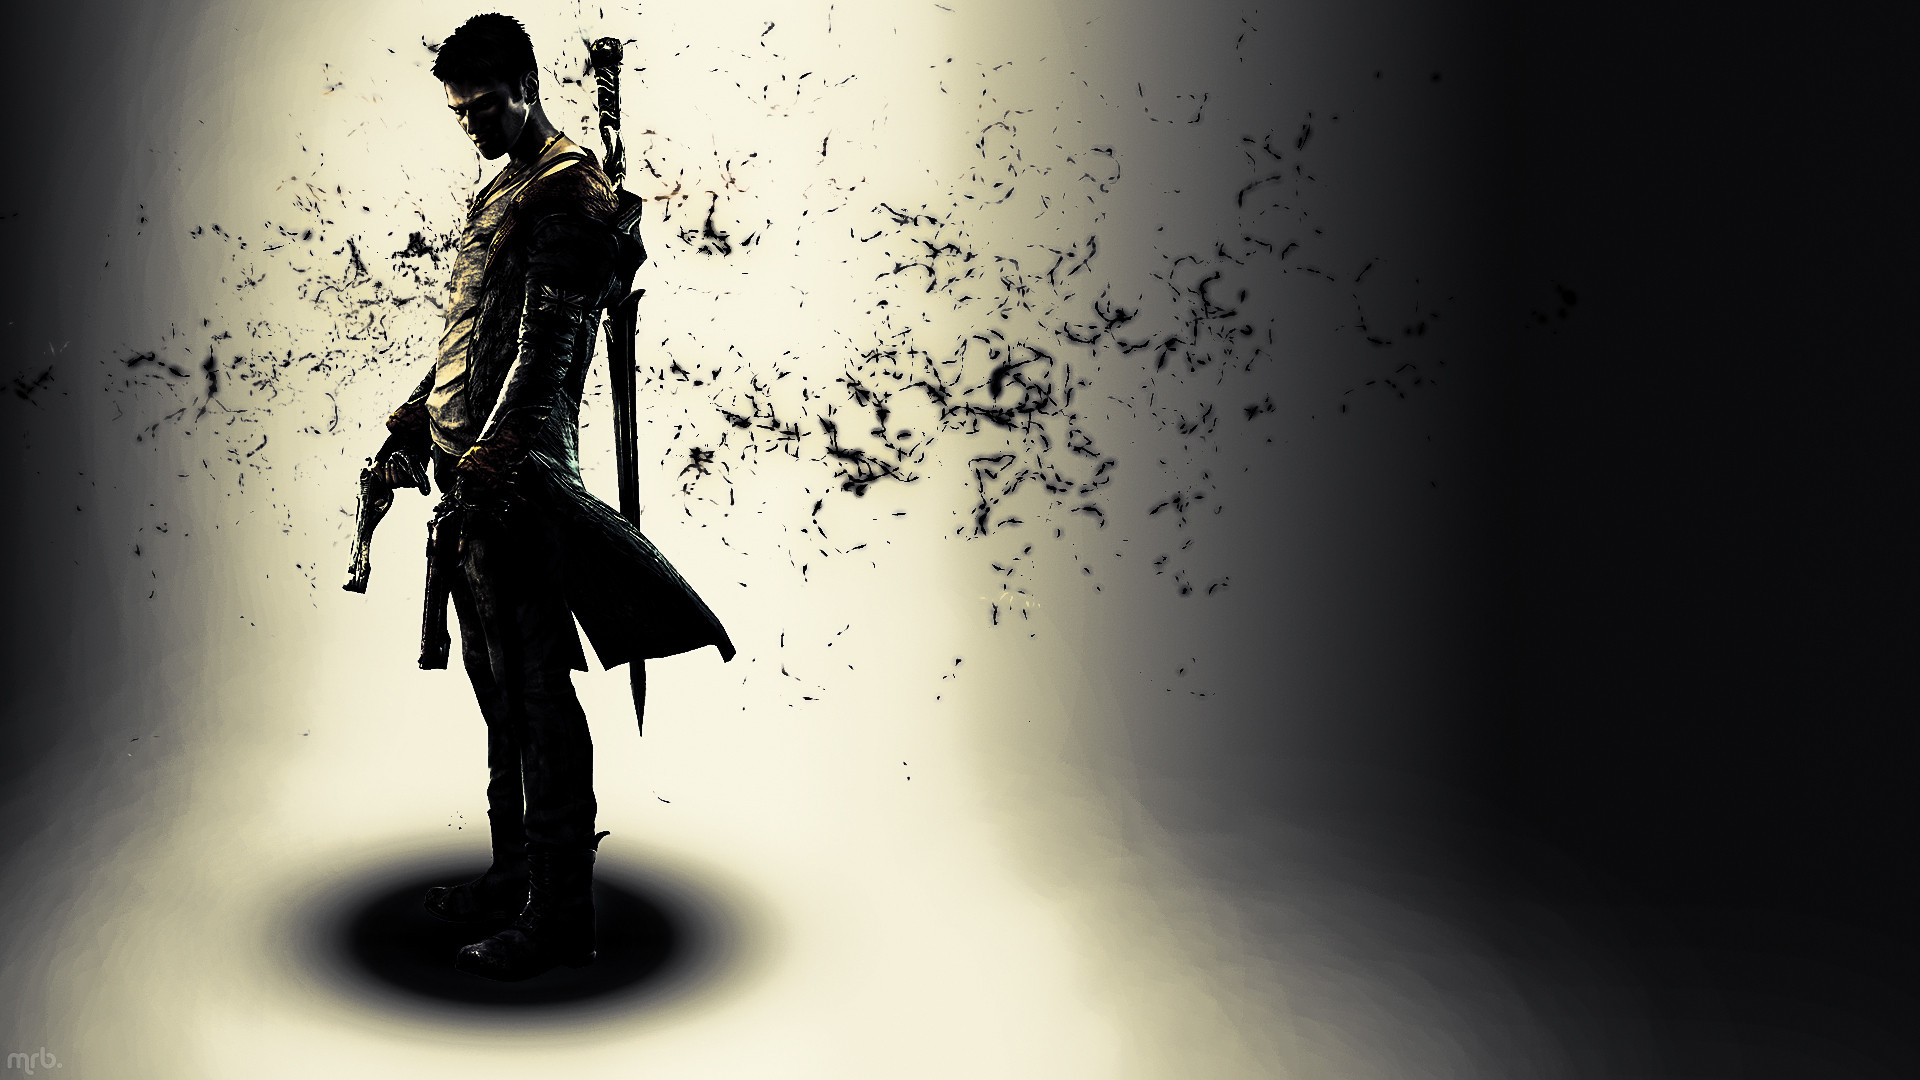 Download wallpaper weapons, the game, shadow, guy, Dante, DmC, Devil May Cry section games in resolution 1920x1080